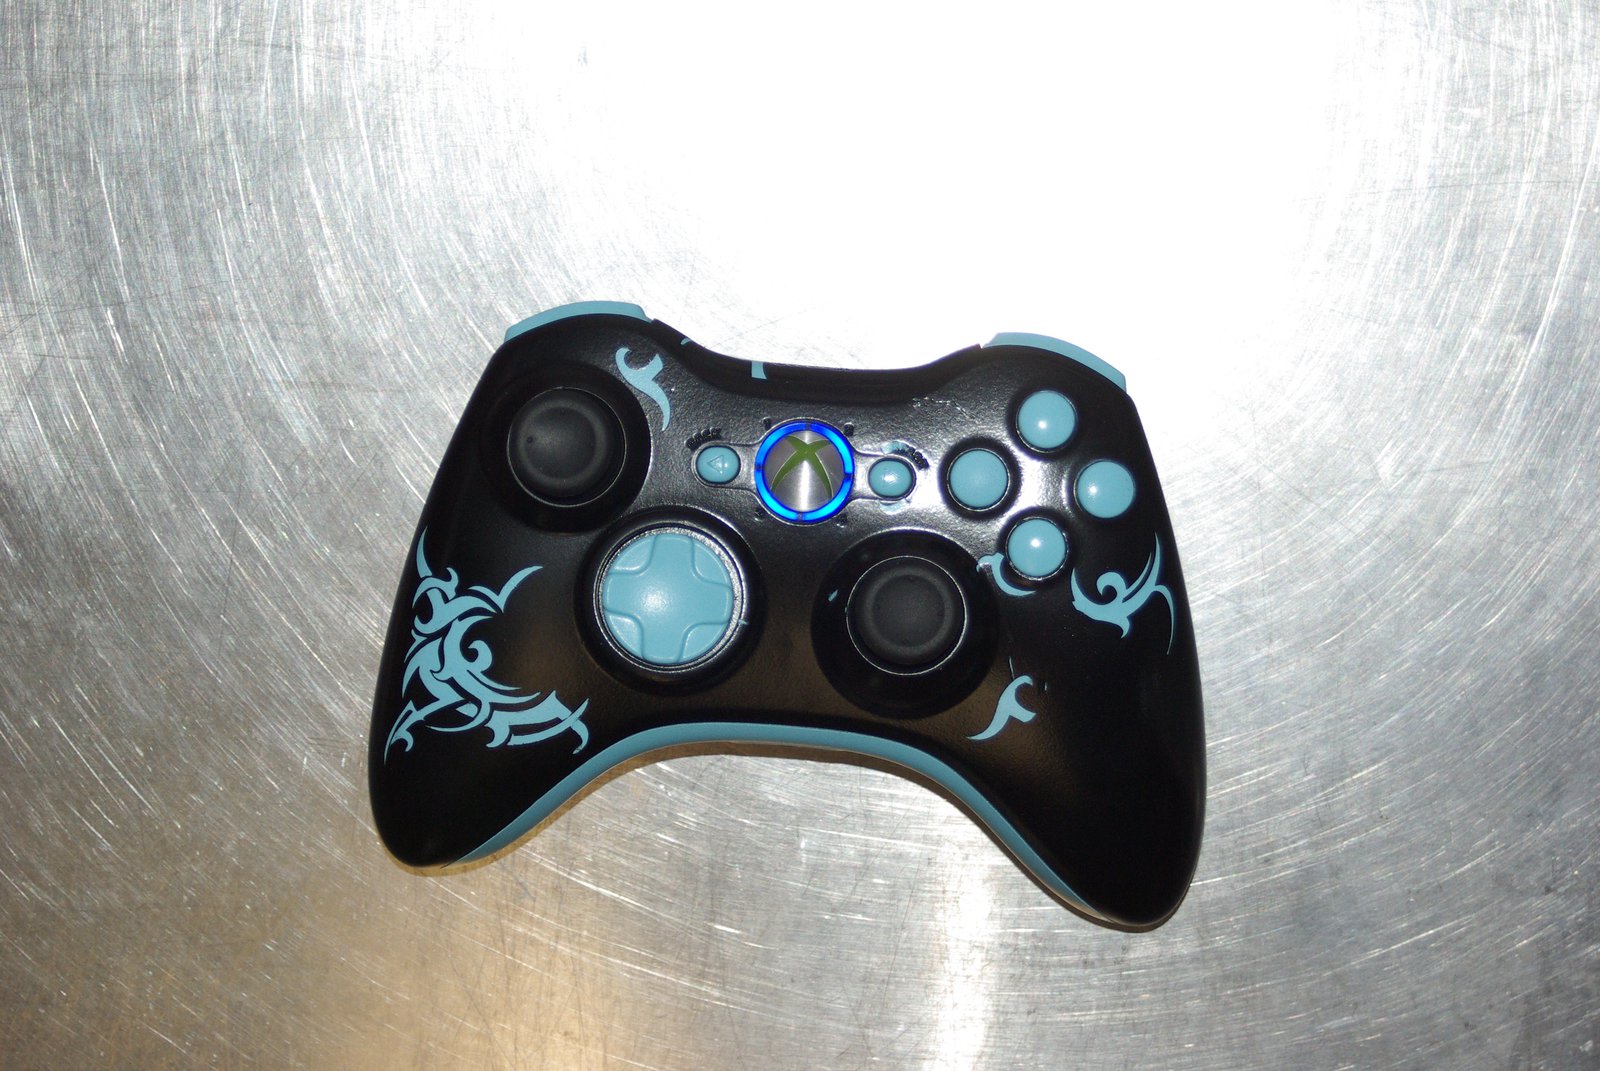 Spikes and Spiral's controller